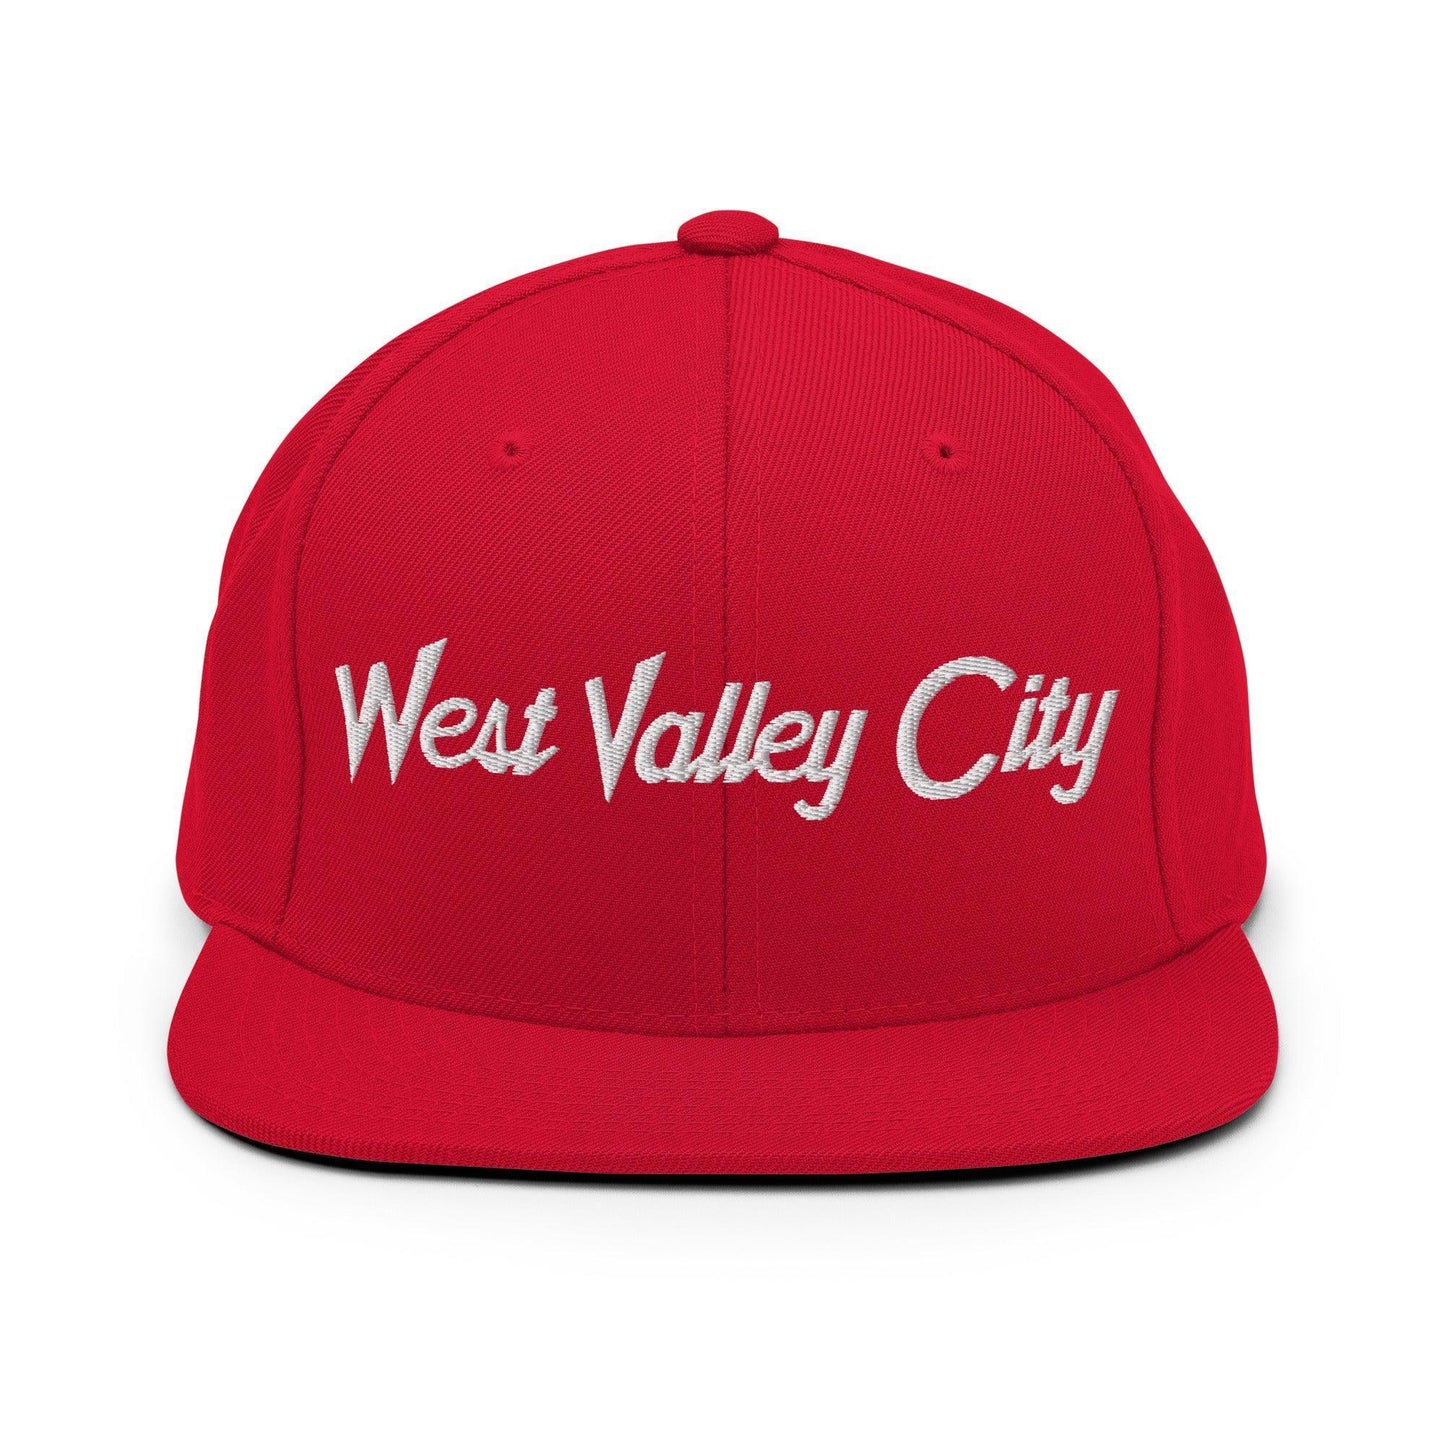 West Valley City Script Snapback Hat Red